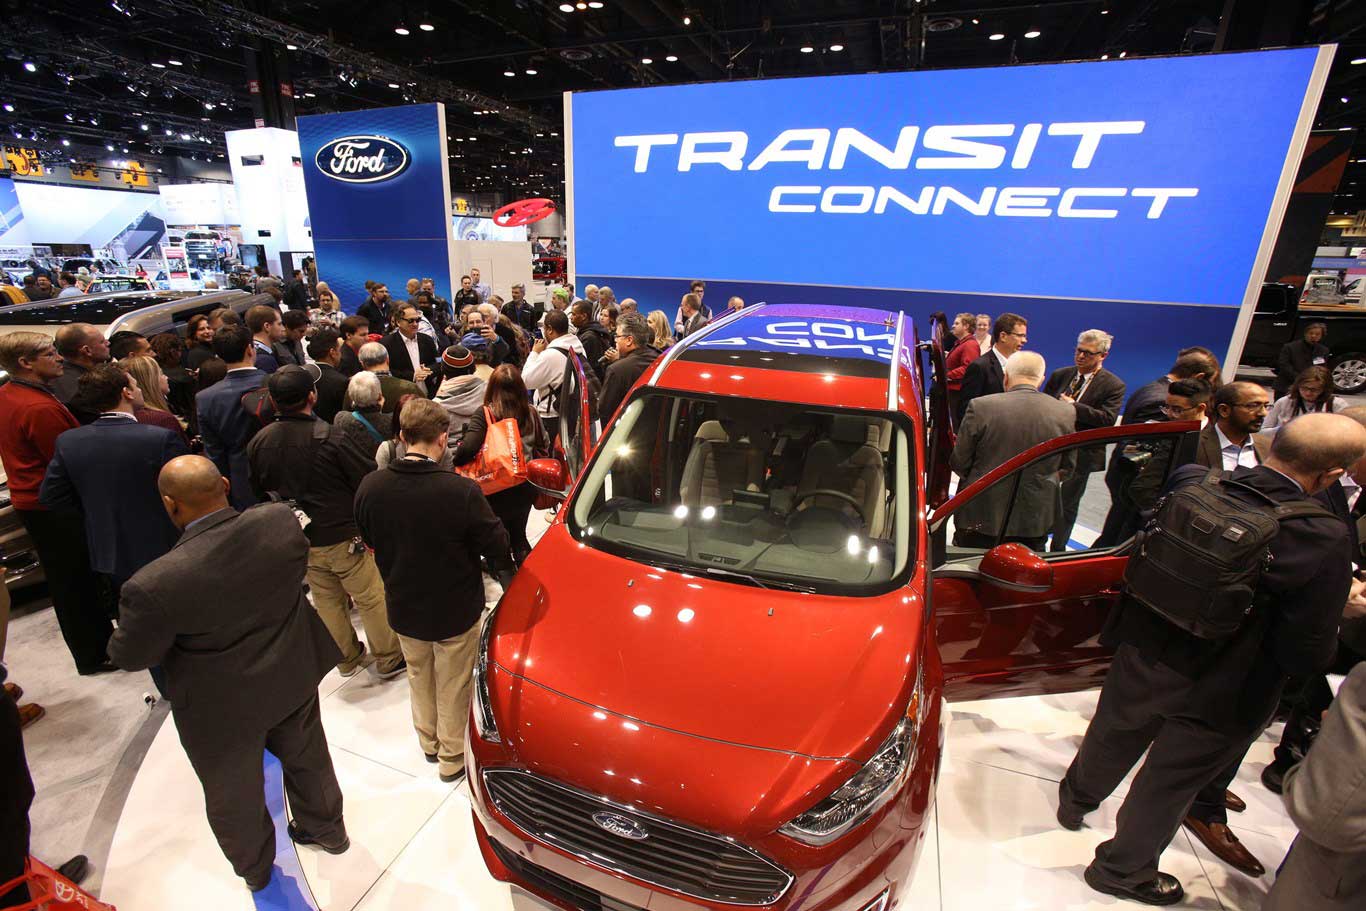 FORD TRANSIT CONNECT WAGON AT 2018 CHICAGO AUTO SHOW